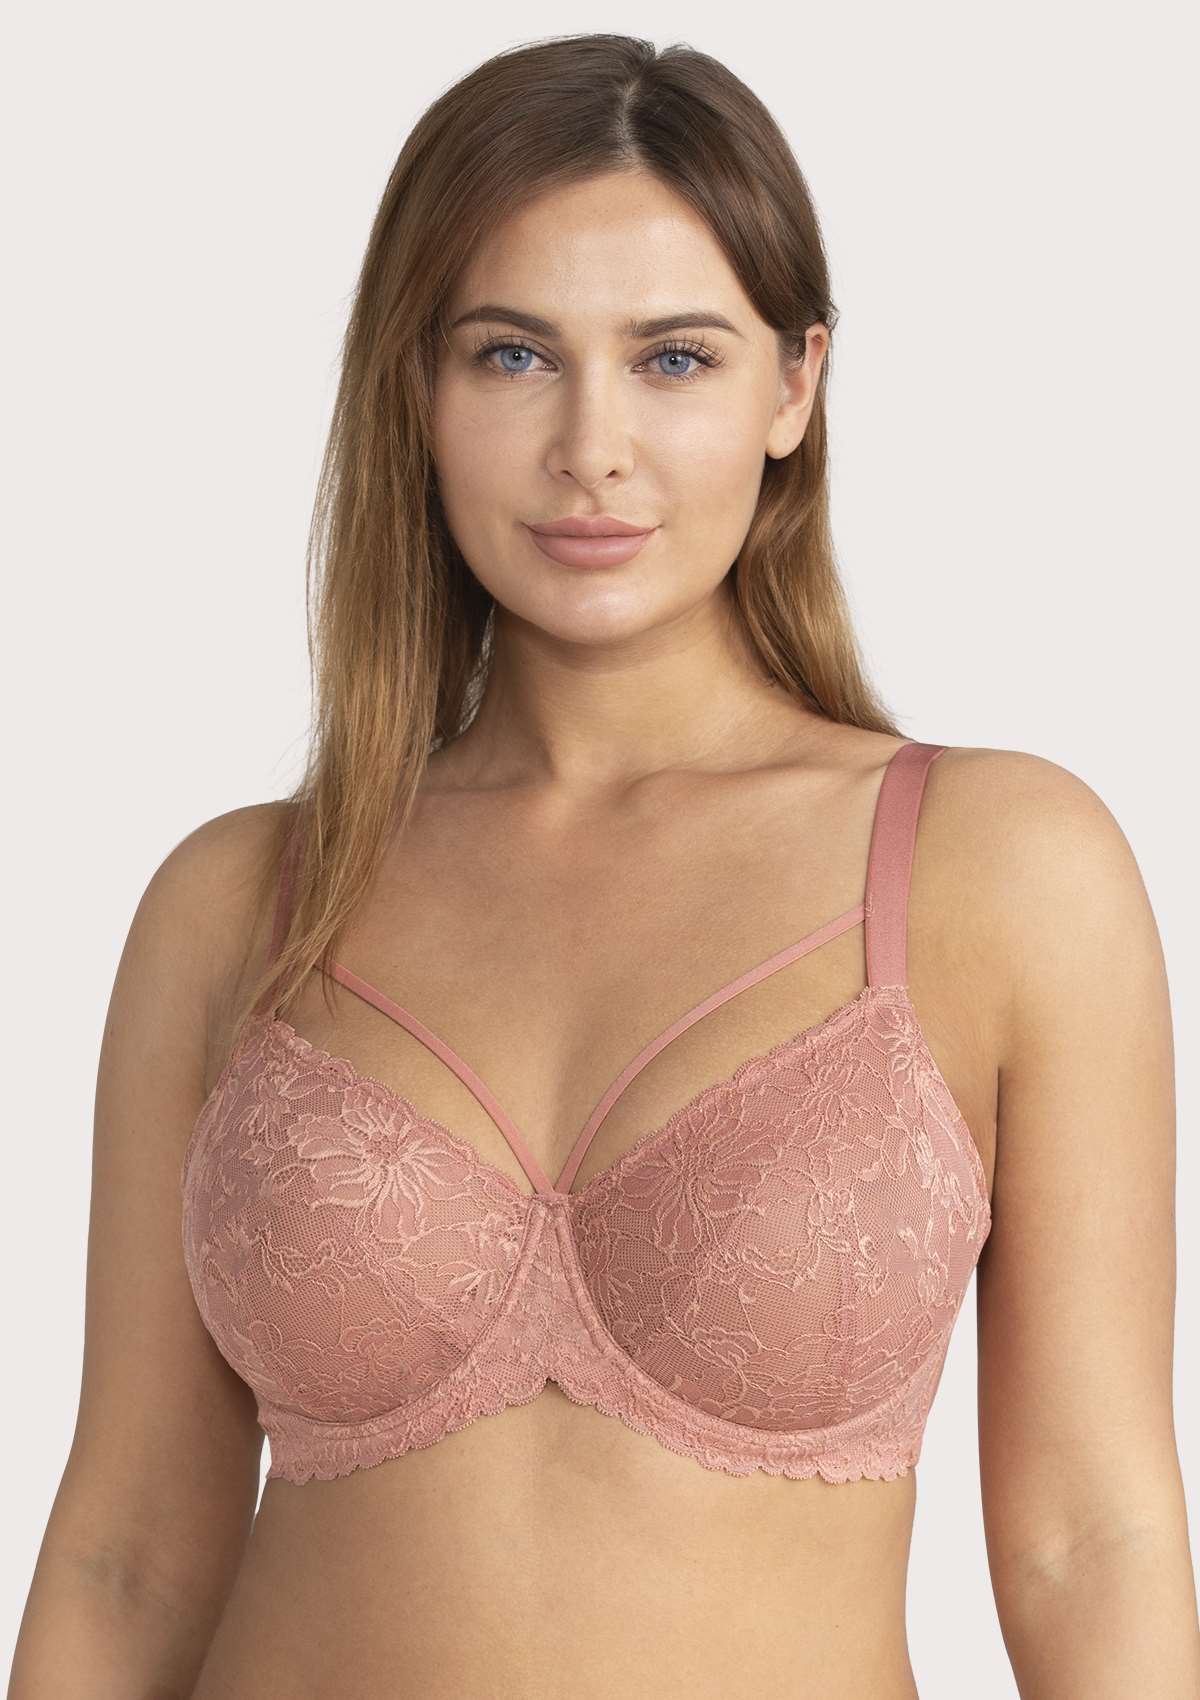 HSIA Pretty In Petals Lace Bra And Panty Sets: Bra For Big Boobs - Light Coral / 38 / D